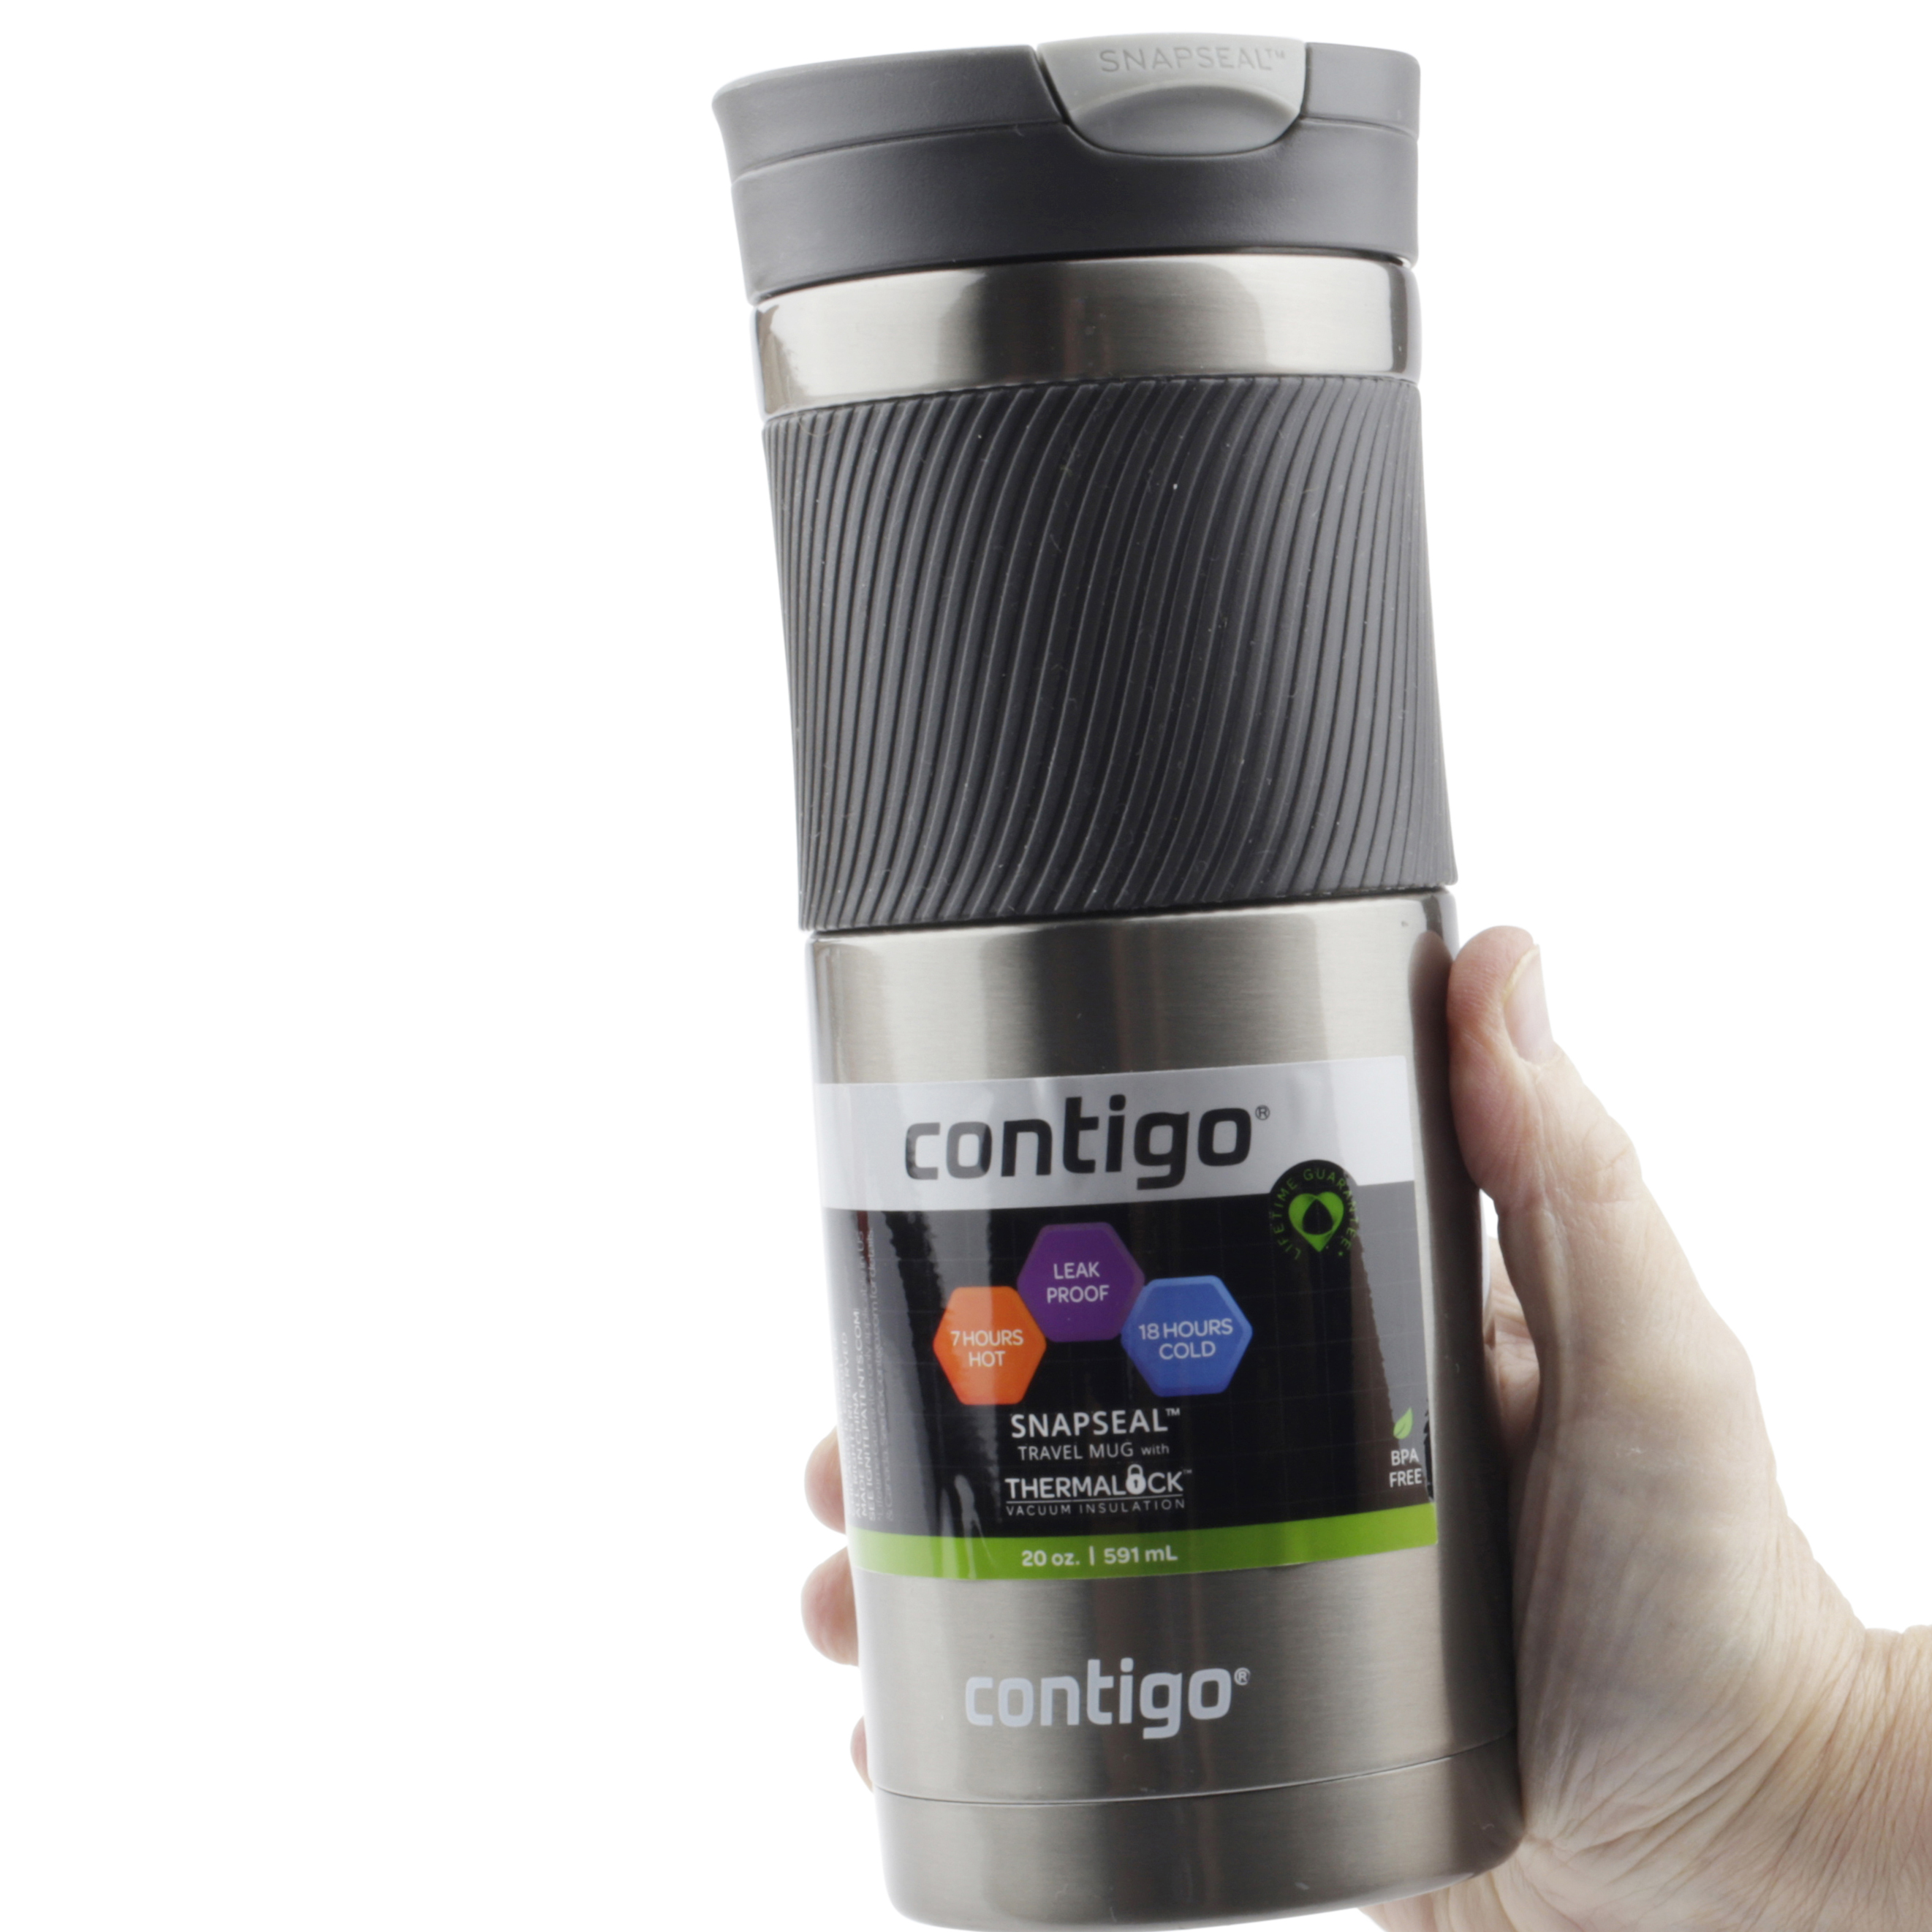 Contigo Byron SnapSeal - Thermal cup - Size 3.15 in - Height 8.1 in - 20 fl.oz - gunmetal - image 3 of 5